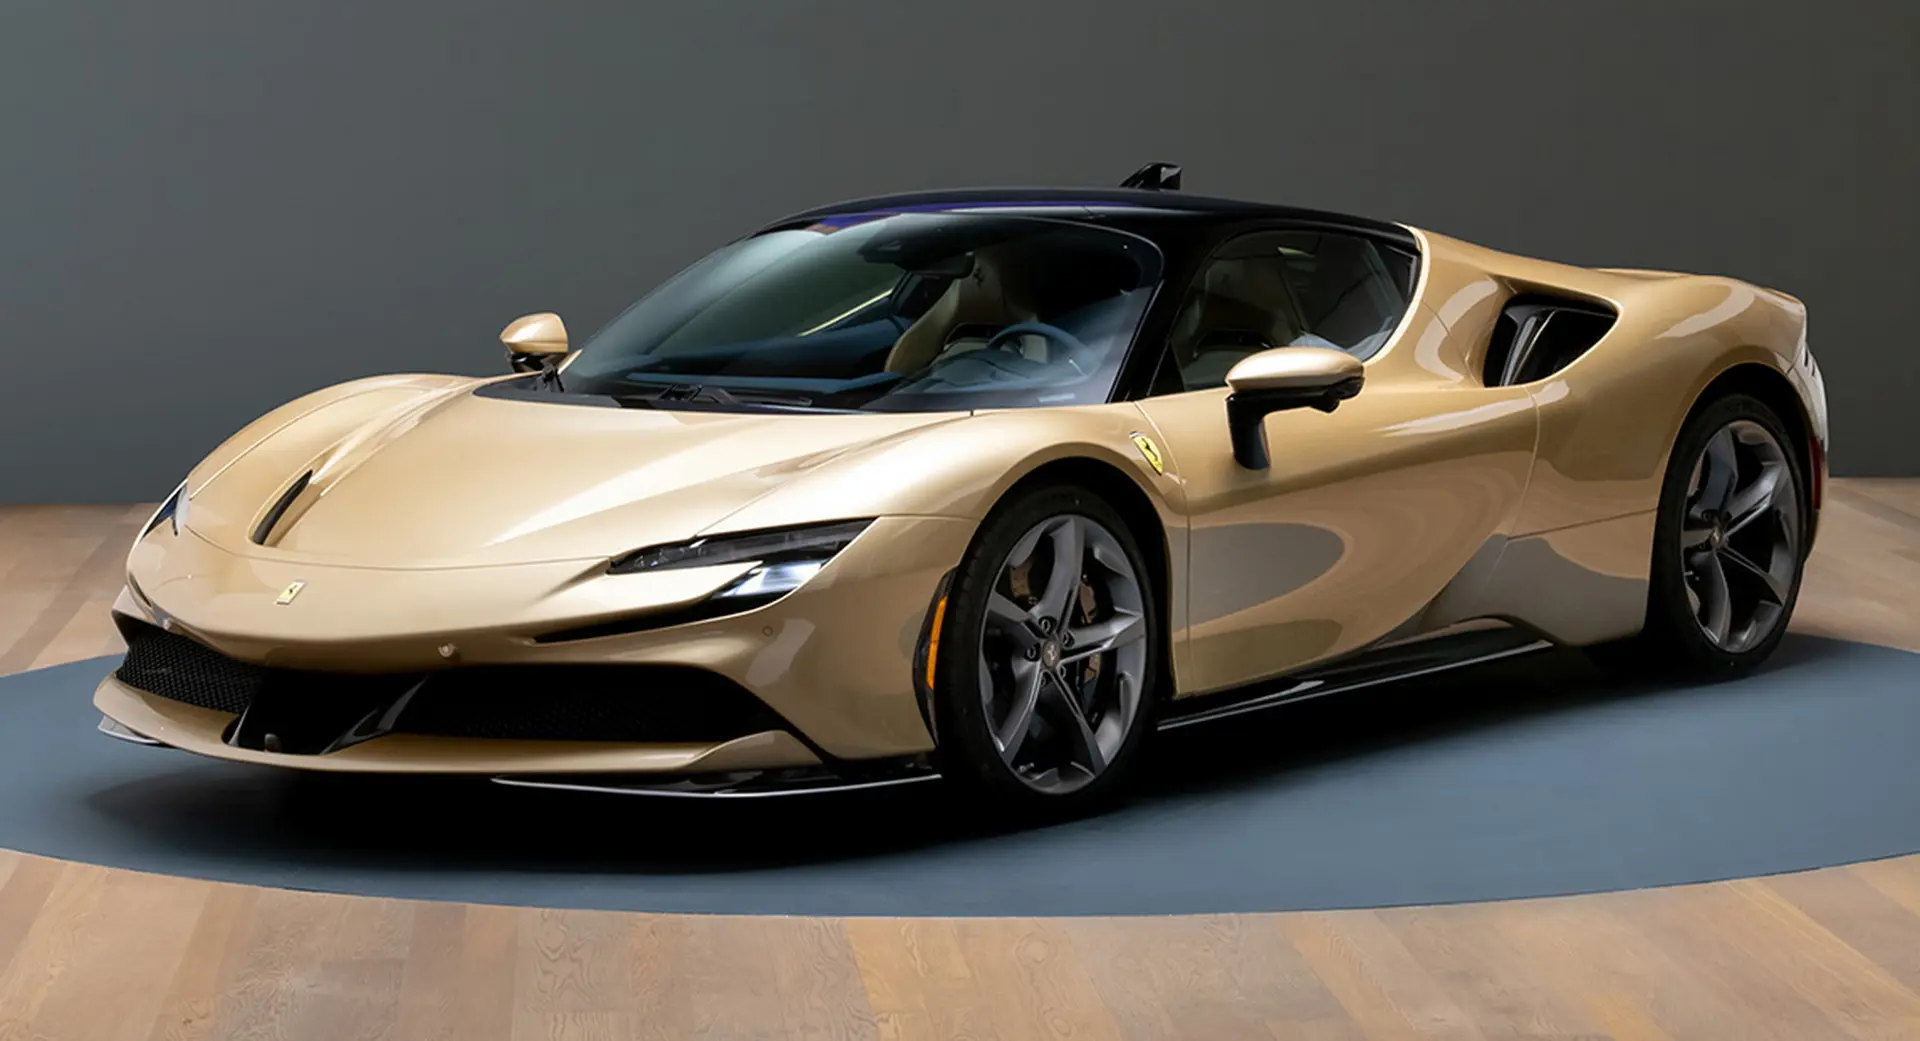 can they make a golden ferrari - How much is the gold super car